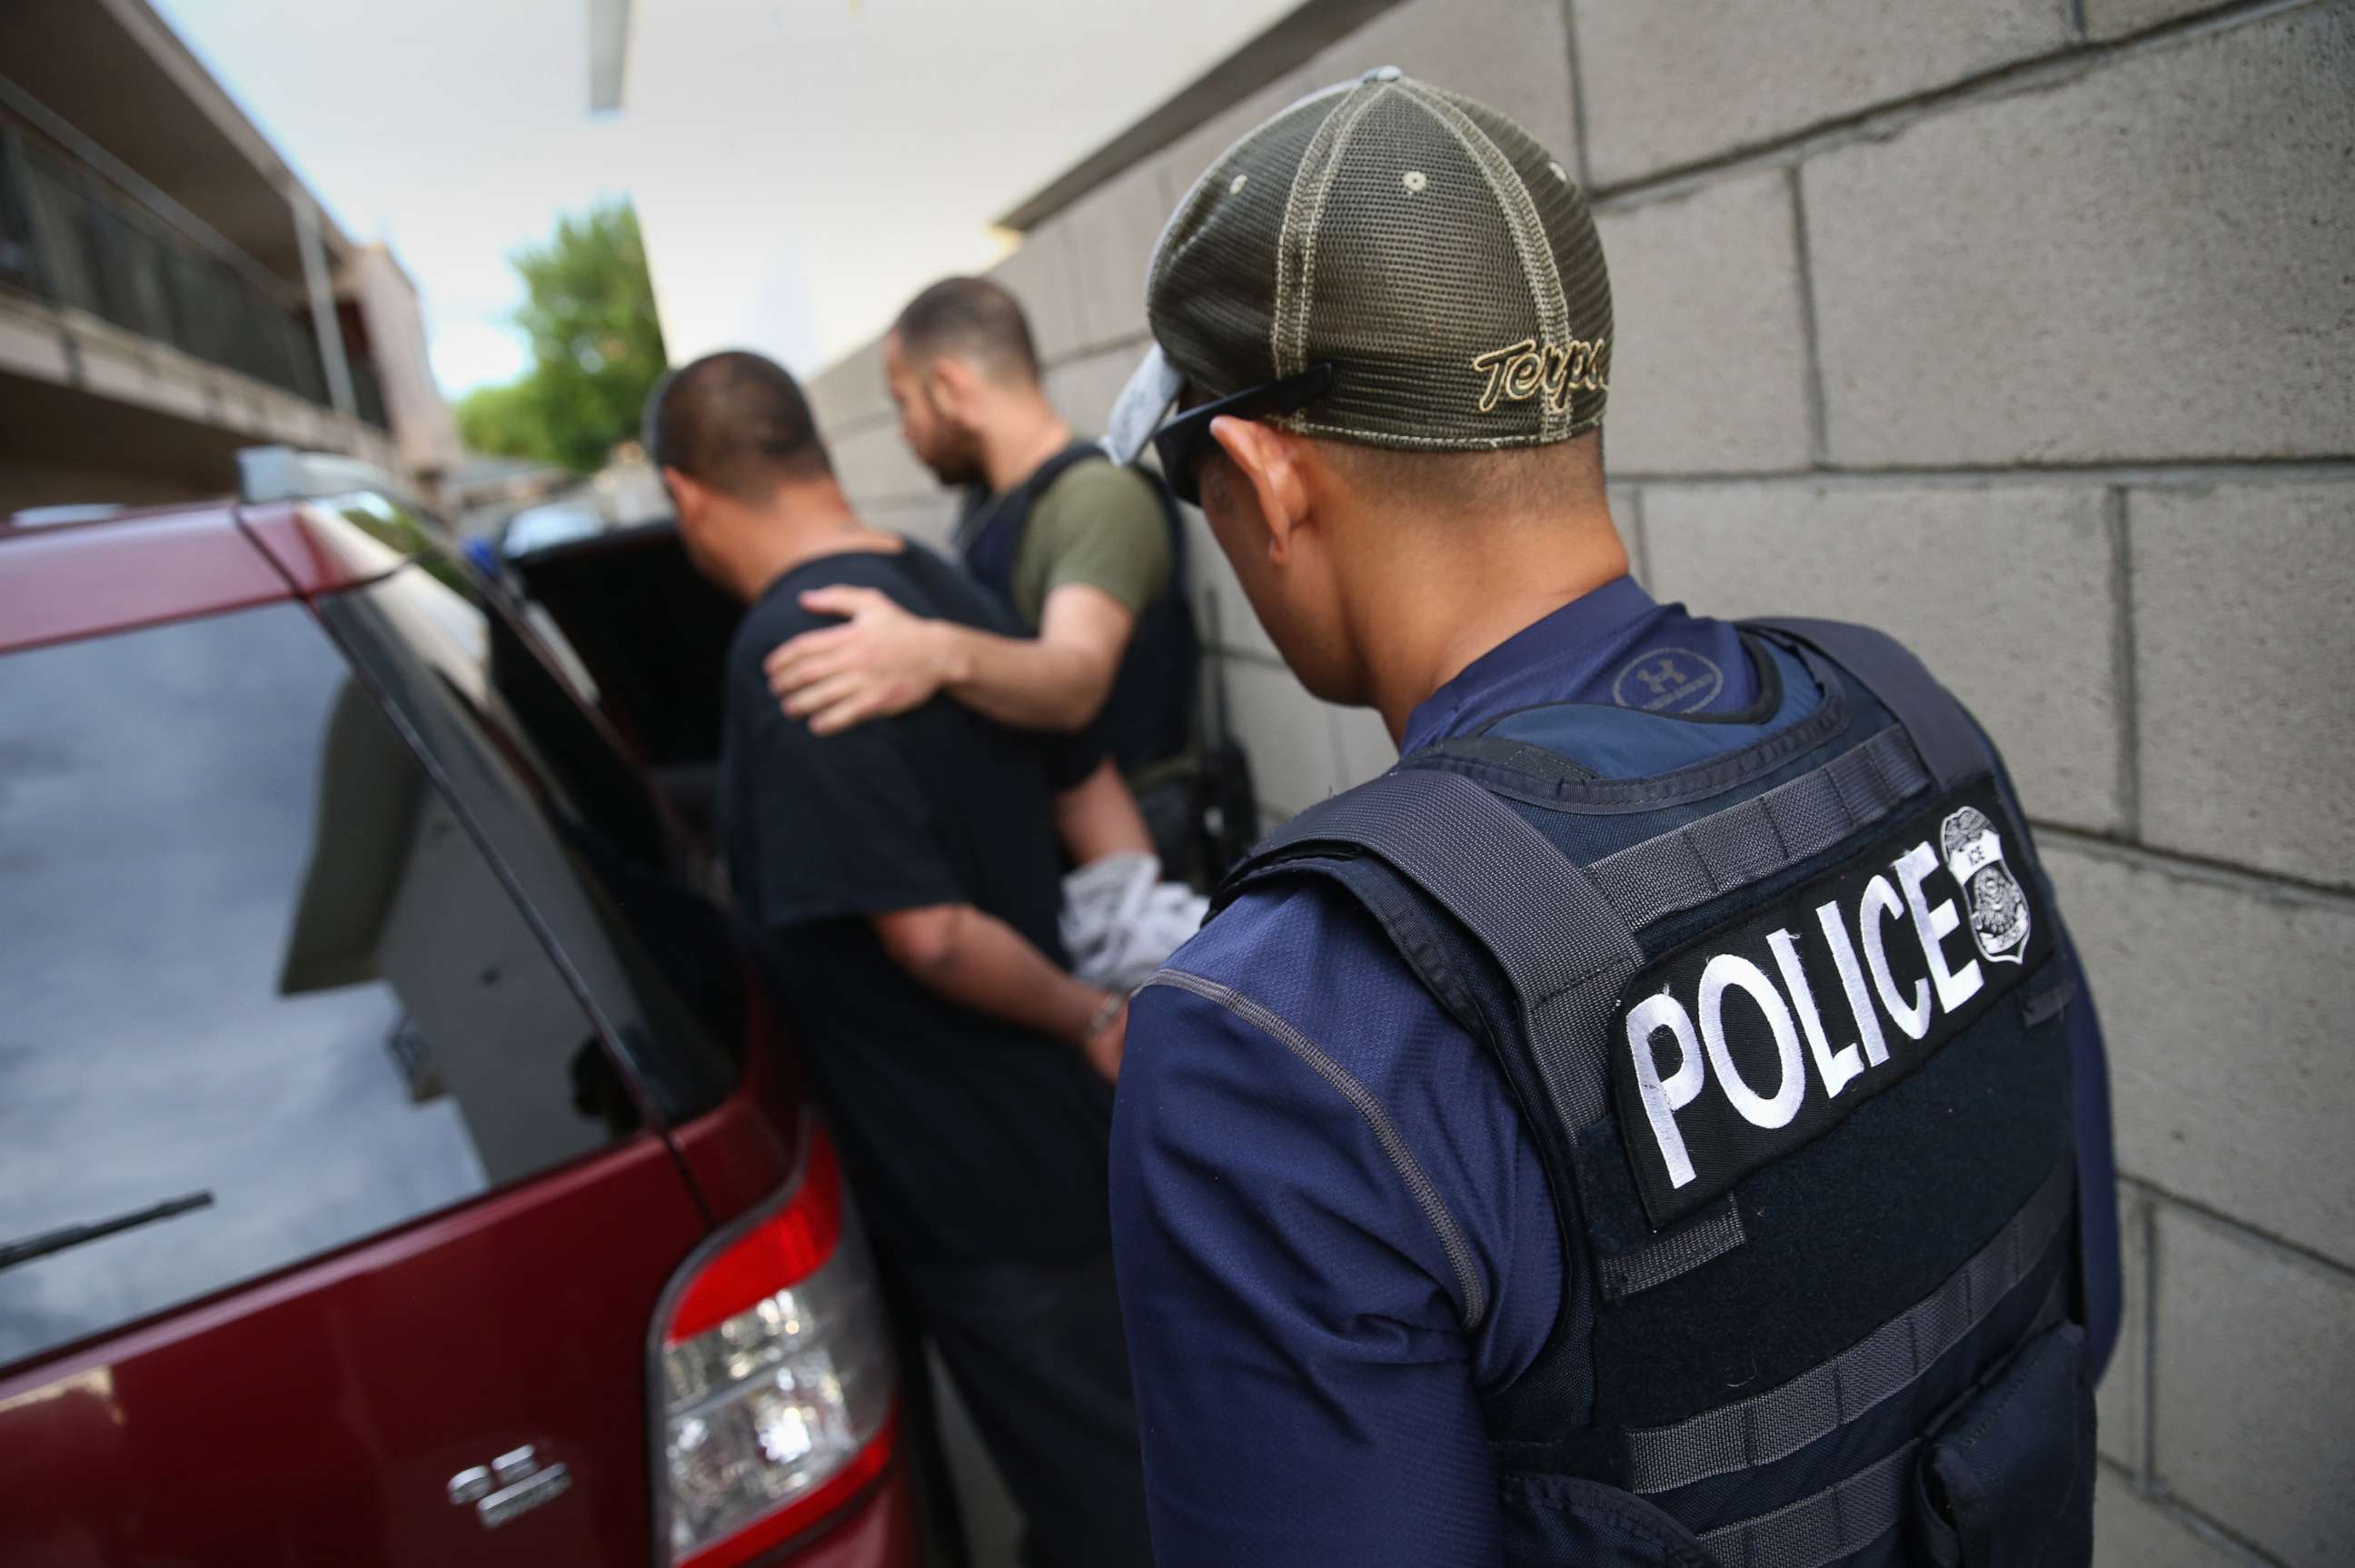 PHOTO: A man is detained by U.S. Immigration and Customs Enforcement (ICE) agents, Oct. 14, 2015, in Los Angeles, Calif.